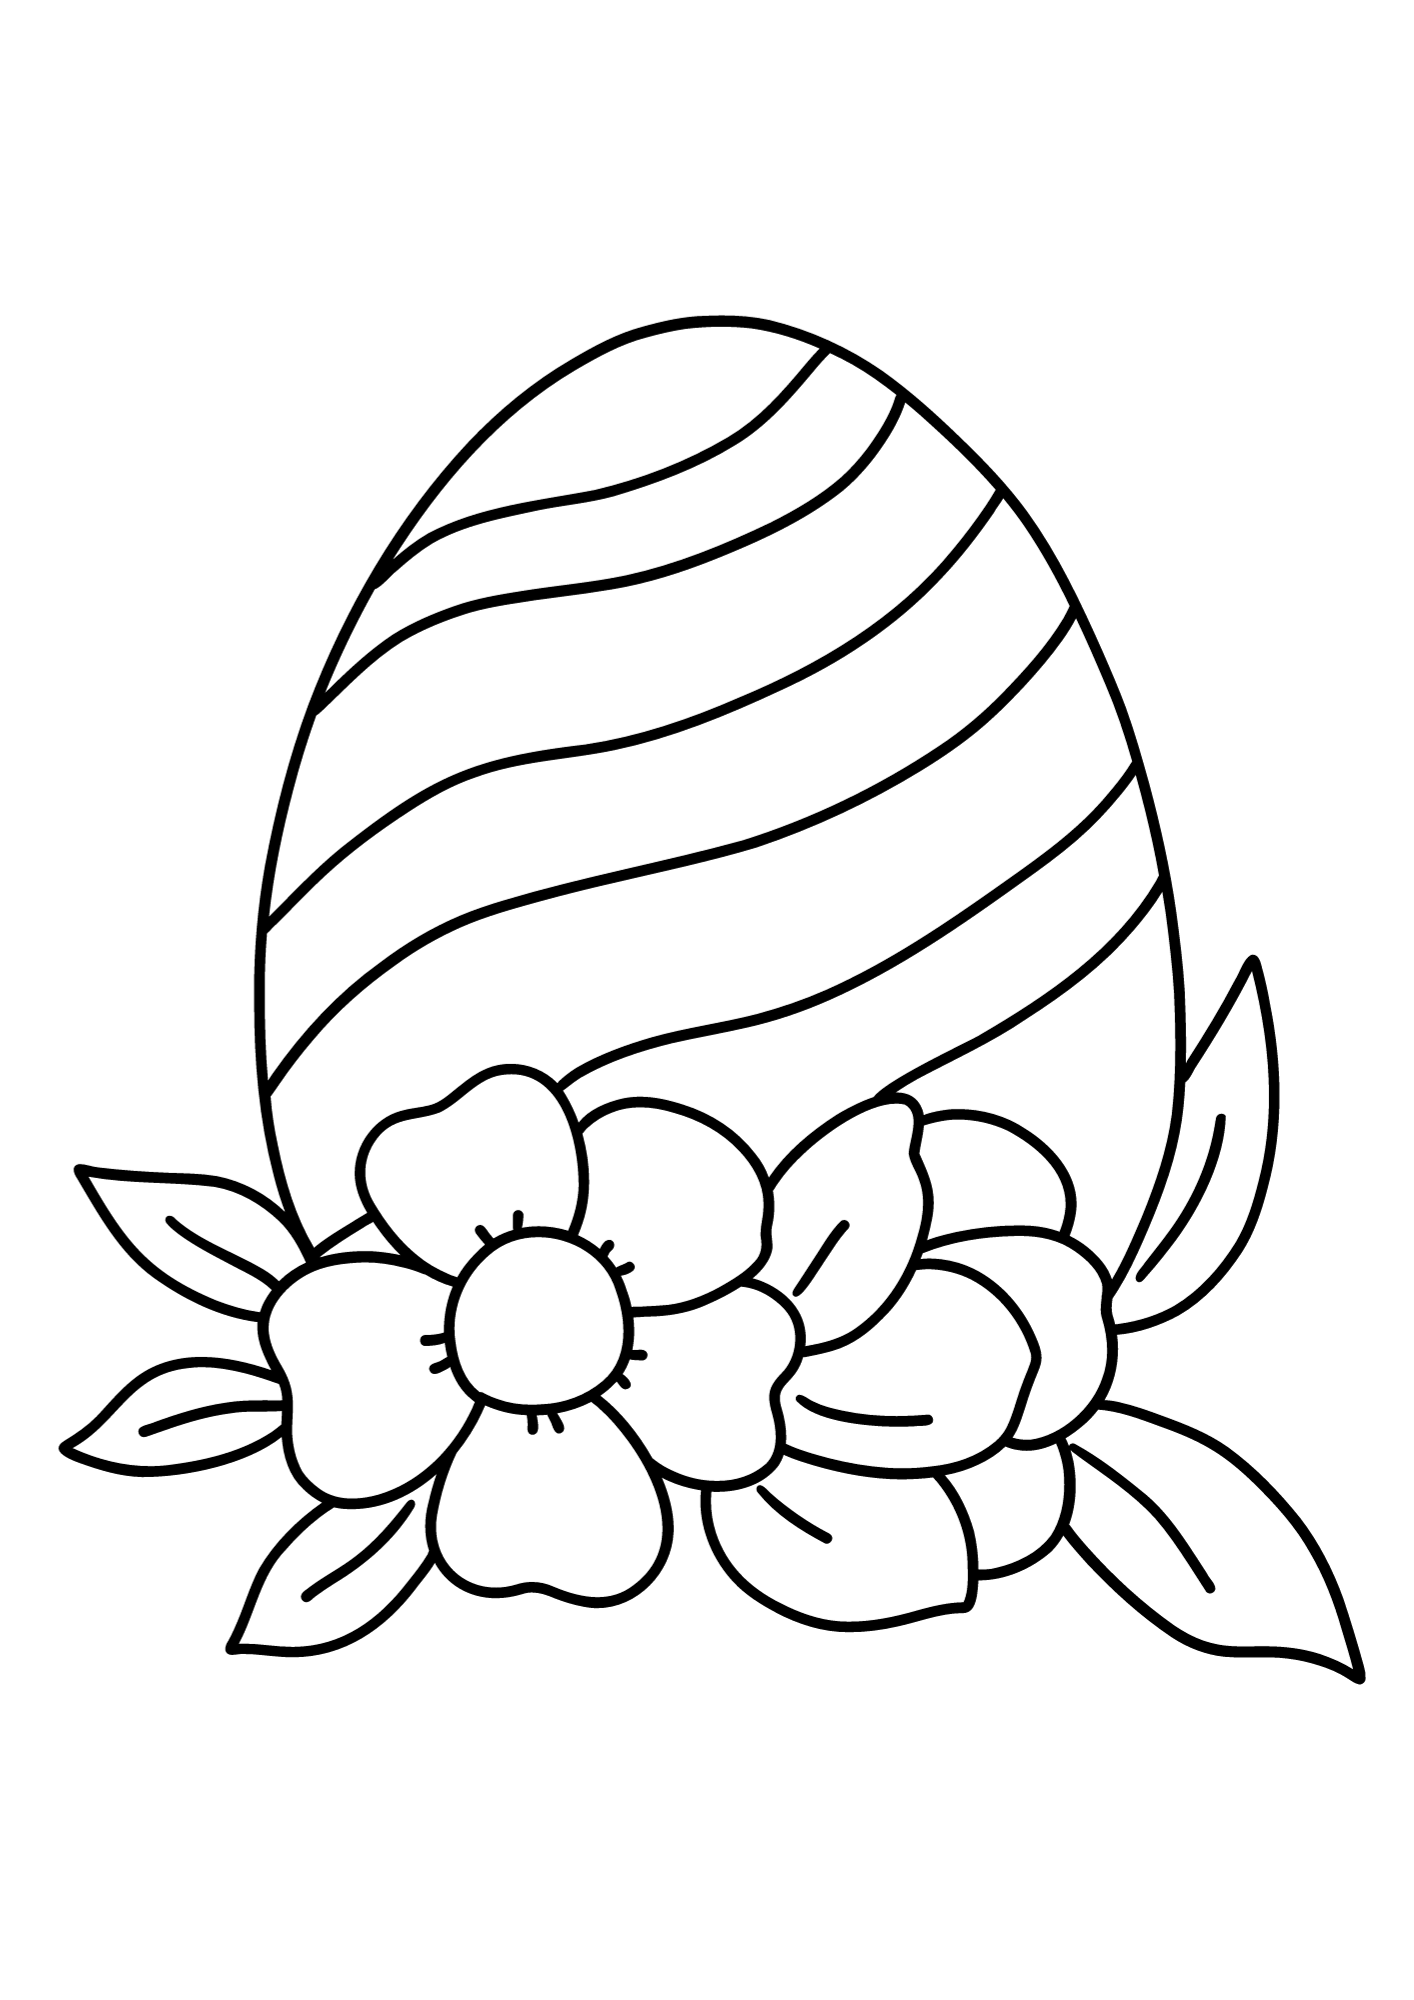 Easter Egg Image Coloring Page